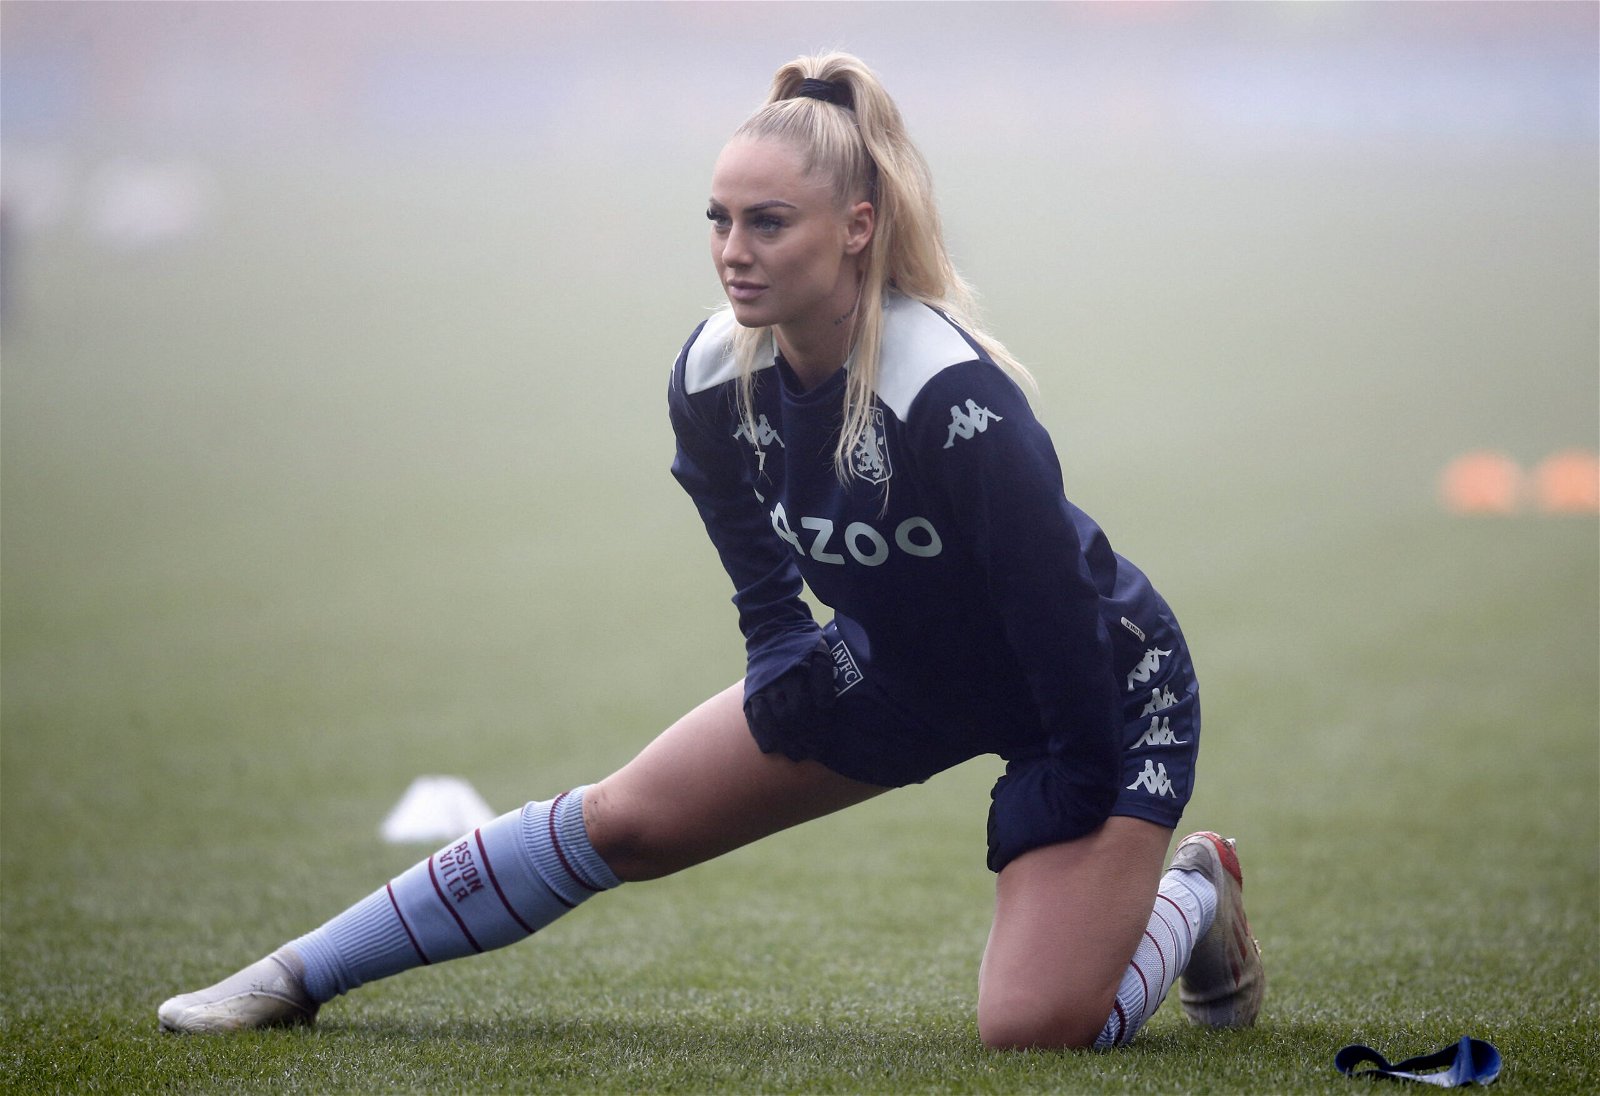 Alisha Lehmann is the hottest female soccer player in UK and sexisiest female football player in the World